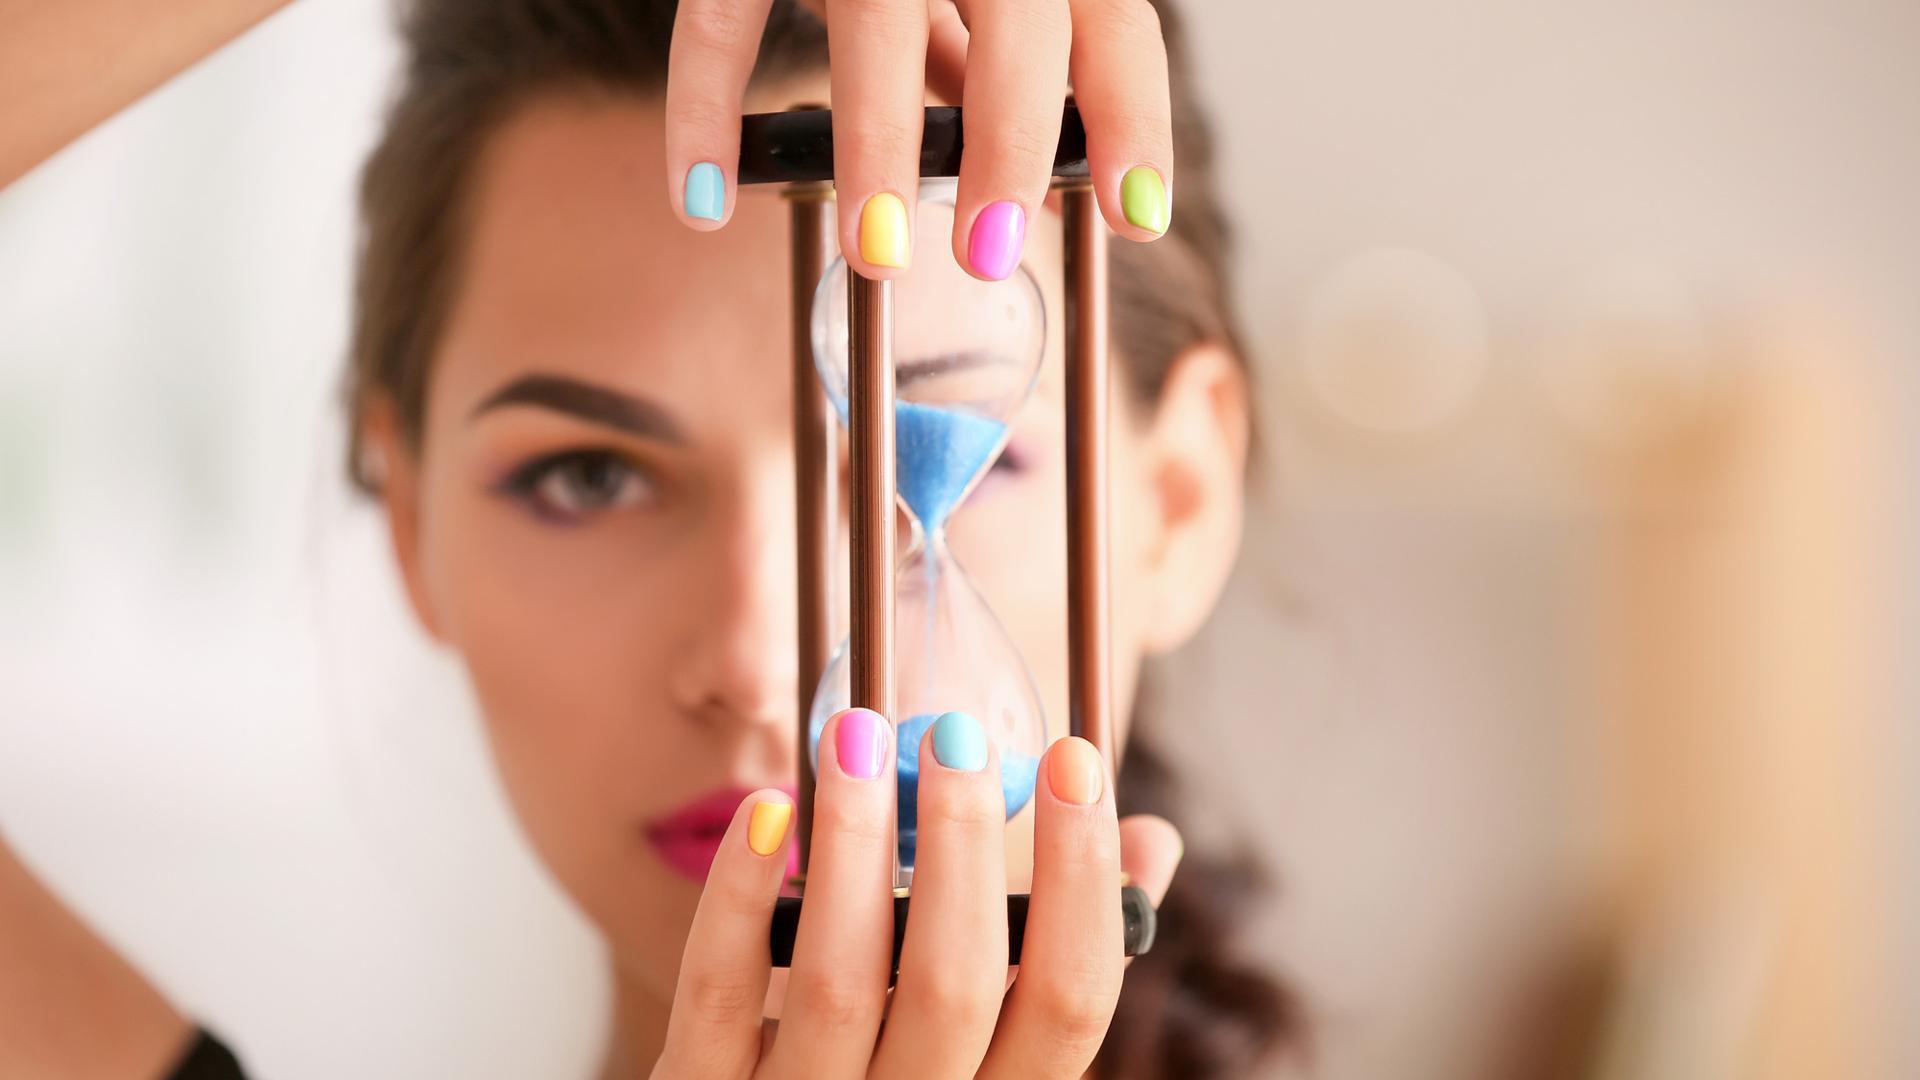 Young woman with colorful manicure holding hourglass